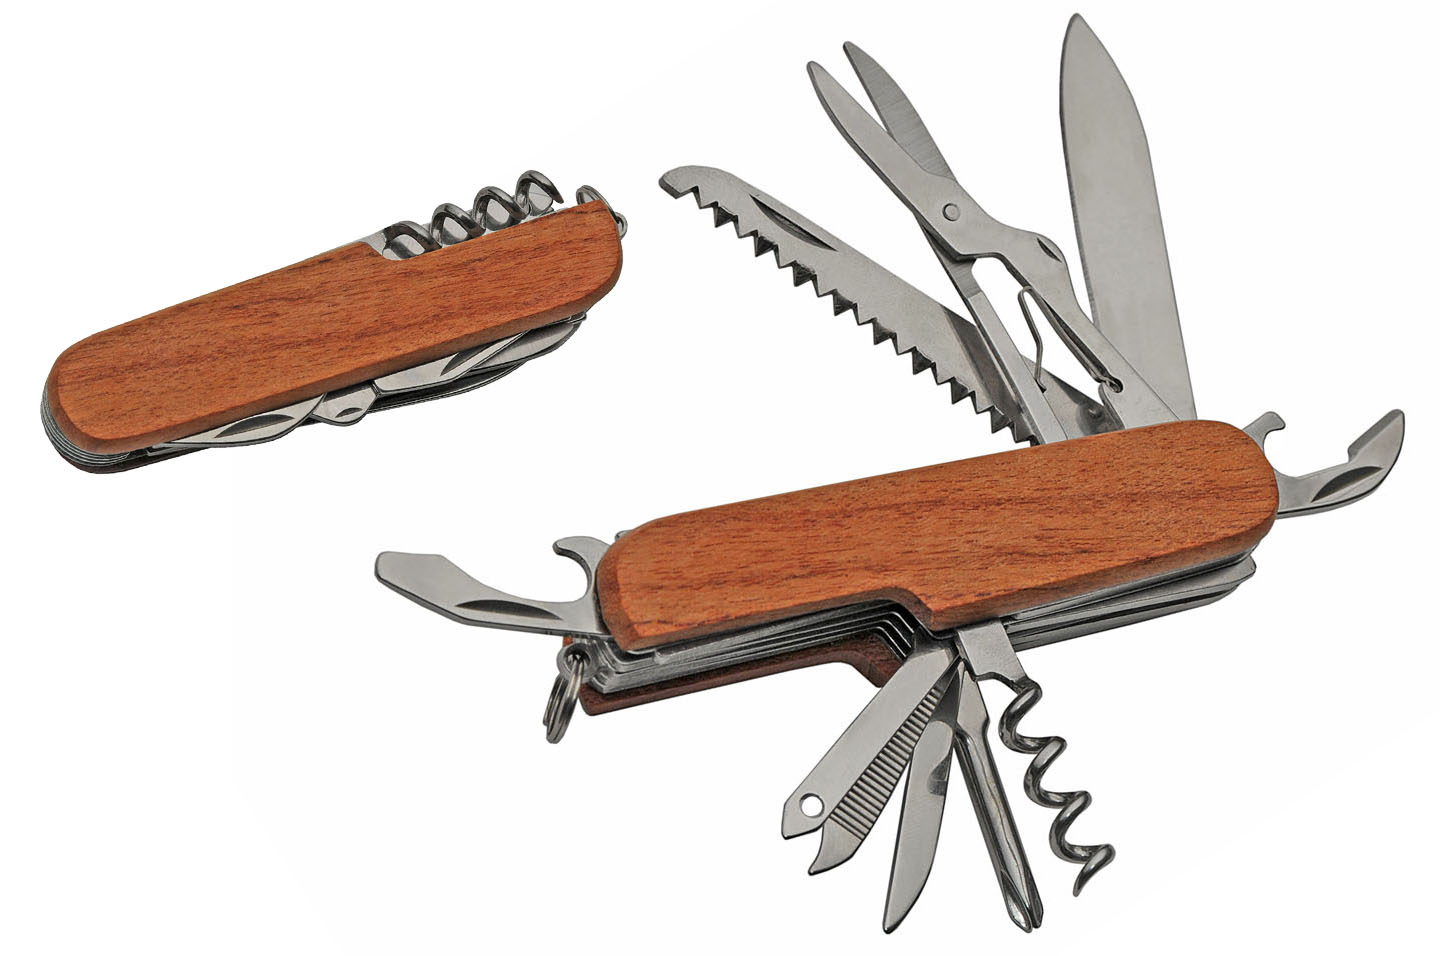 Multi-Function Camp Army Knife 3.5in. Wood Handle Engrave Multi-Tool